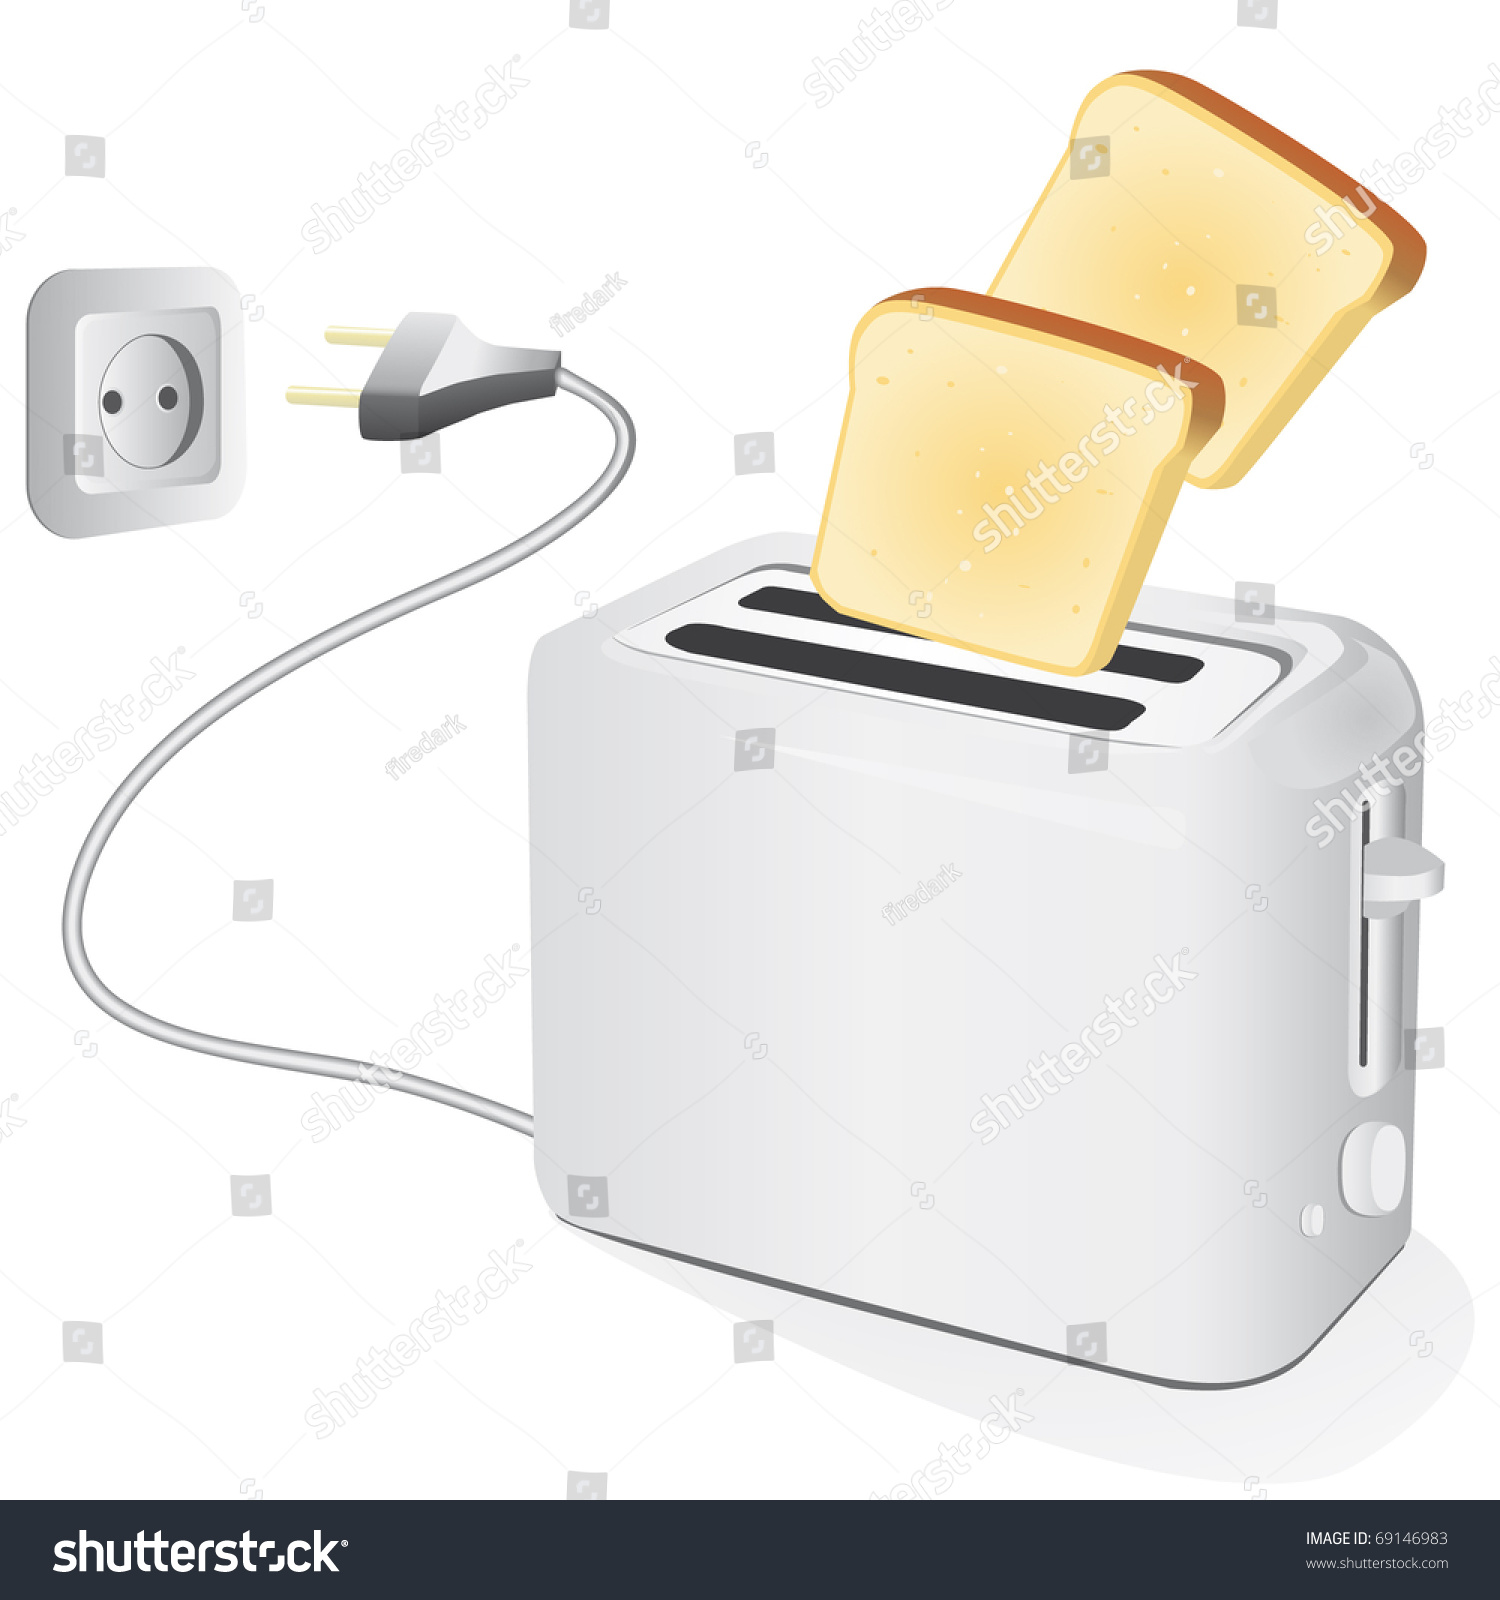 How much electricity does a toaster use?